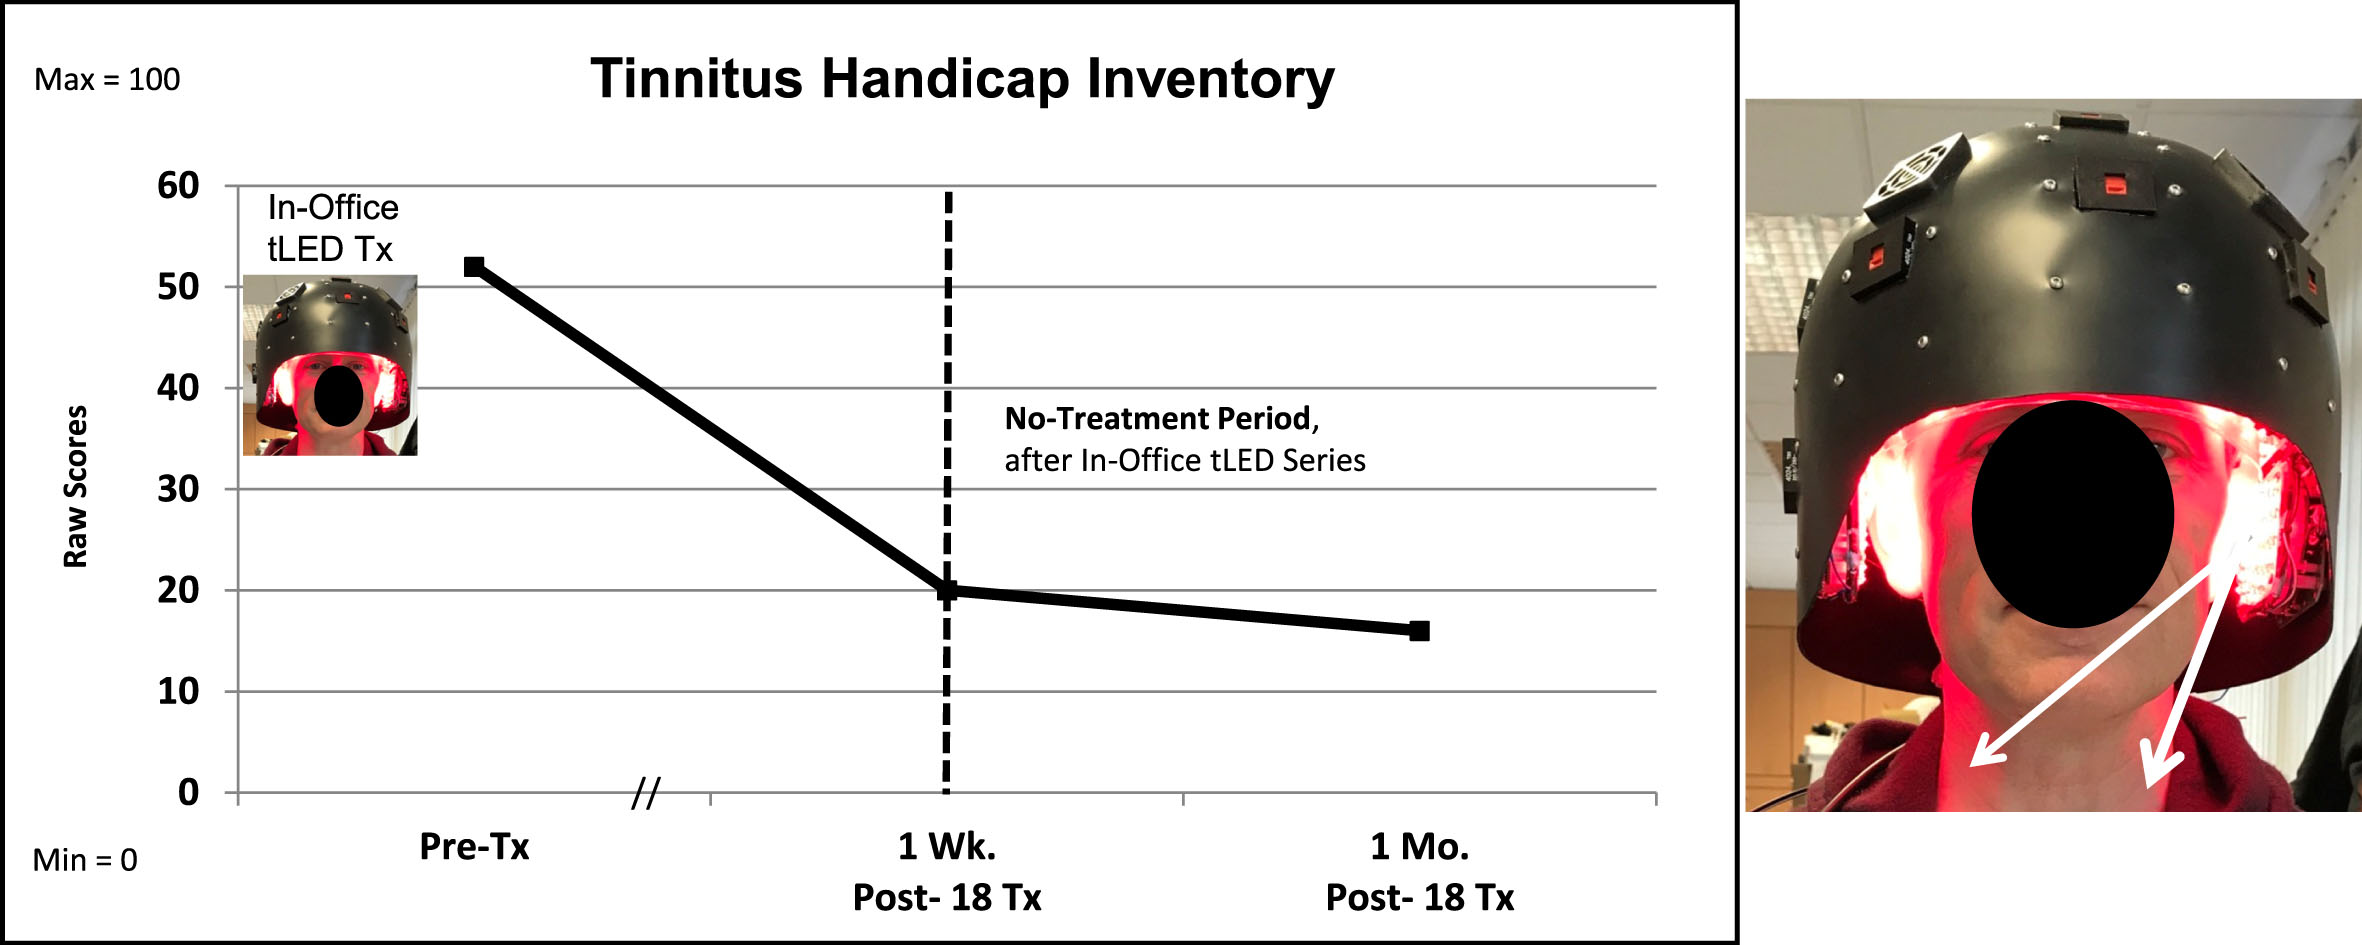 P3, Tinnitus Handicap Inventory. The severe tinnitus ratings on the THI were reduced at 1 week, and at 1 month after the in-office series. White arrows suggest that the red/NIR photons reached sides of the neck with the LED-lined helmet (Protocol C). The NIR photons likely reached the left and right stellate ganglion areas, a target for NIR photons to reduce tinnitus [91]. THI, Tinnitus Handicap Inventory.